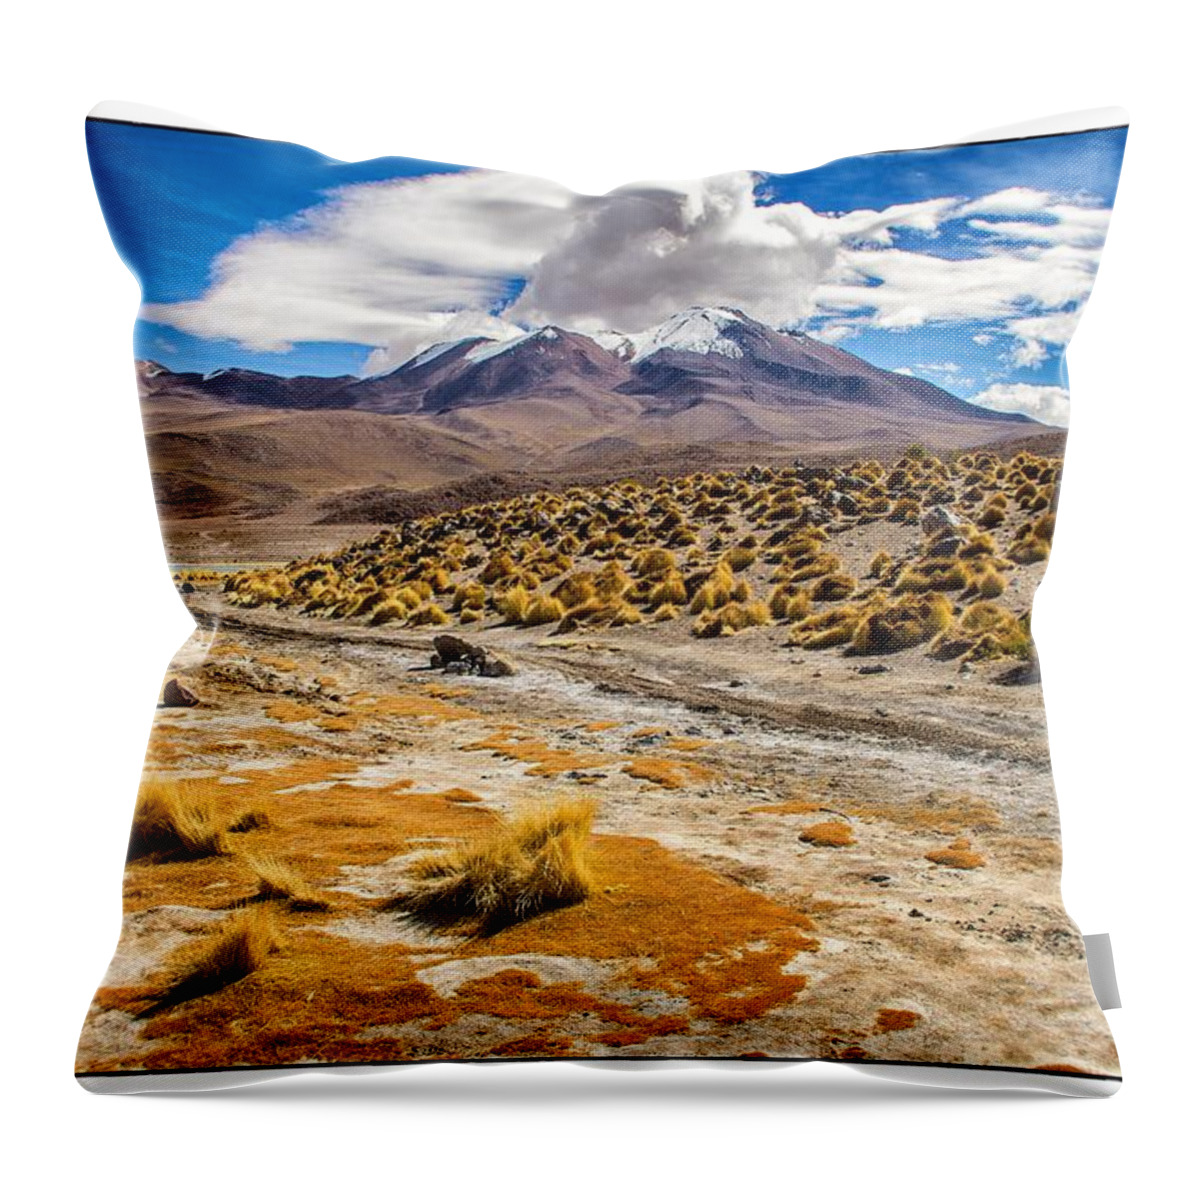  Lagoon Throw Pillow featuring the photograph Lost In The Bolivian Desert Framed by For Ninety One Days